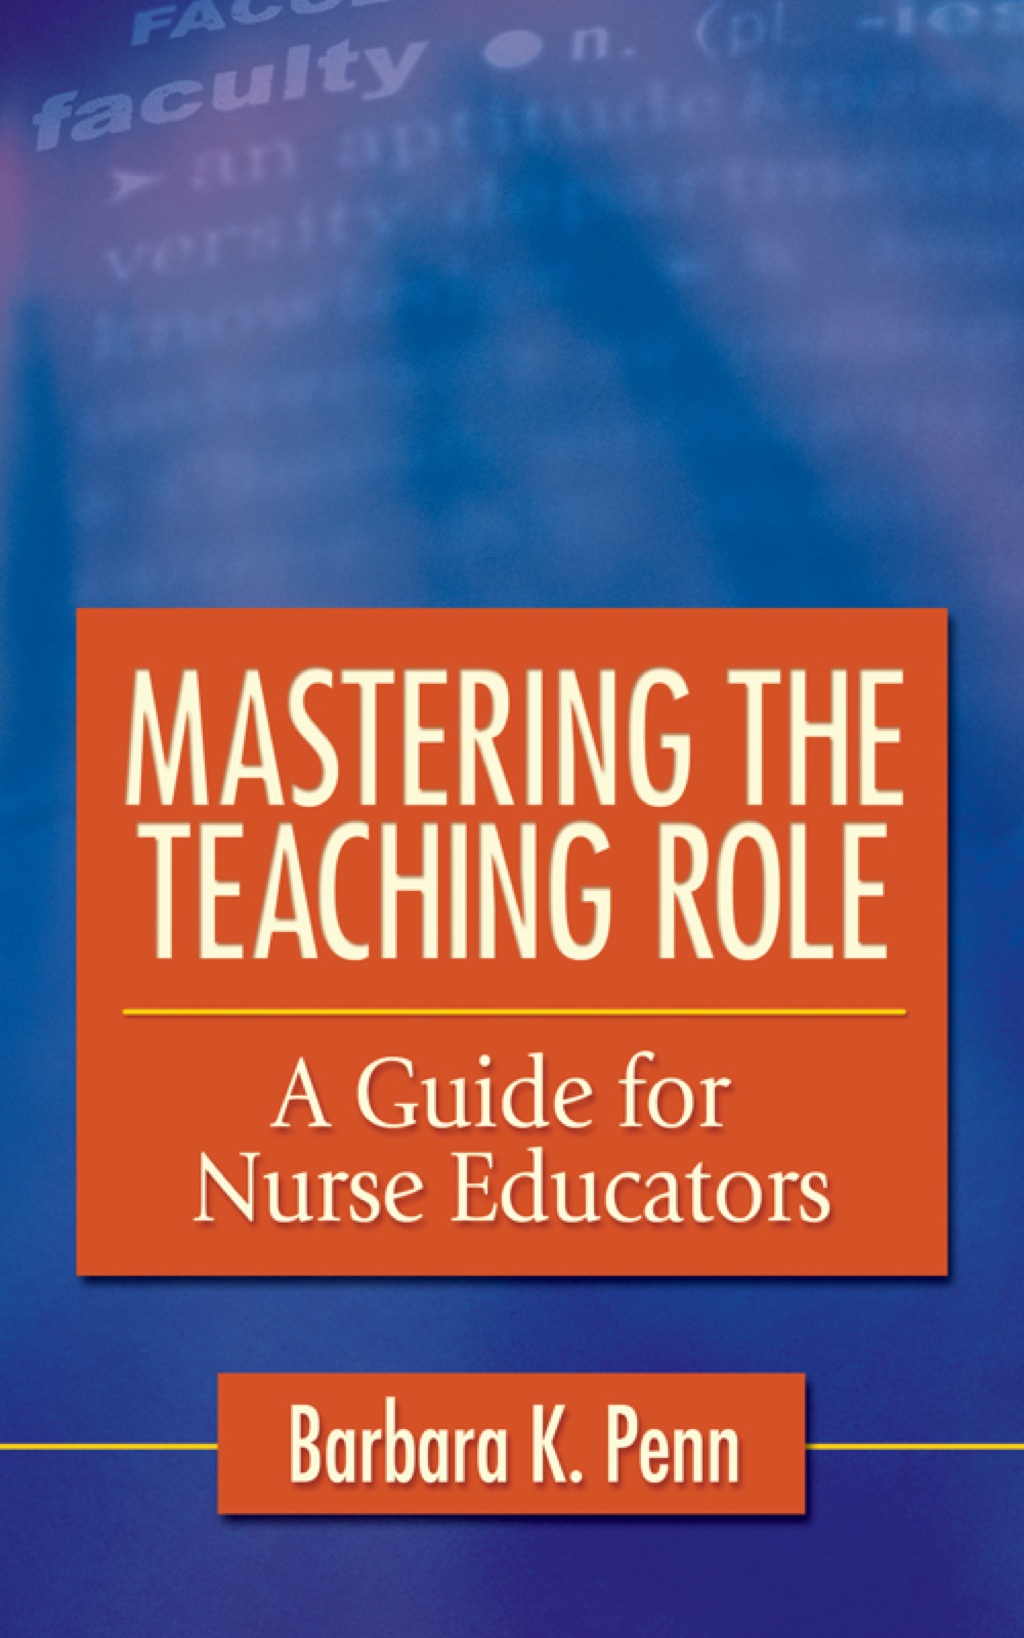 Mastering the Teaching Role: A Guide for Nurse Educators (eBook Rental)